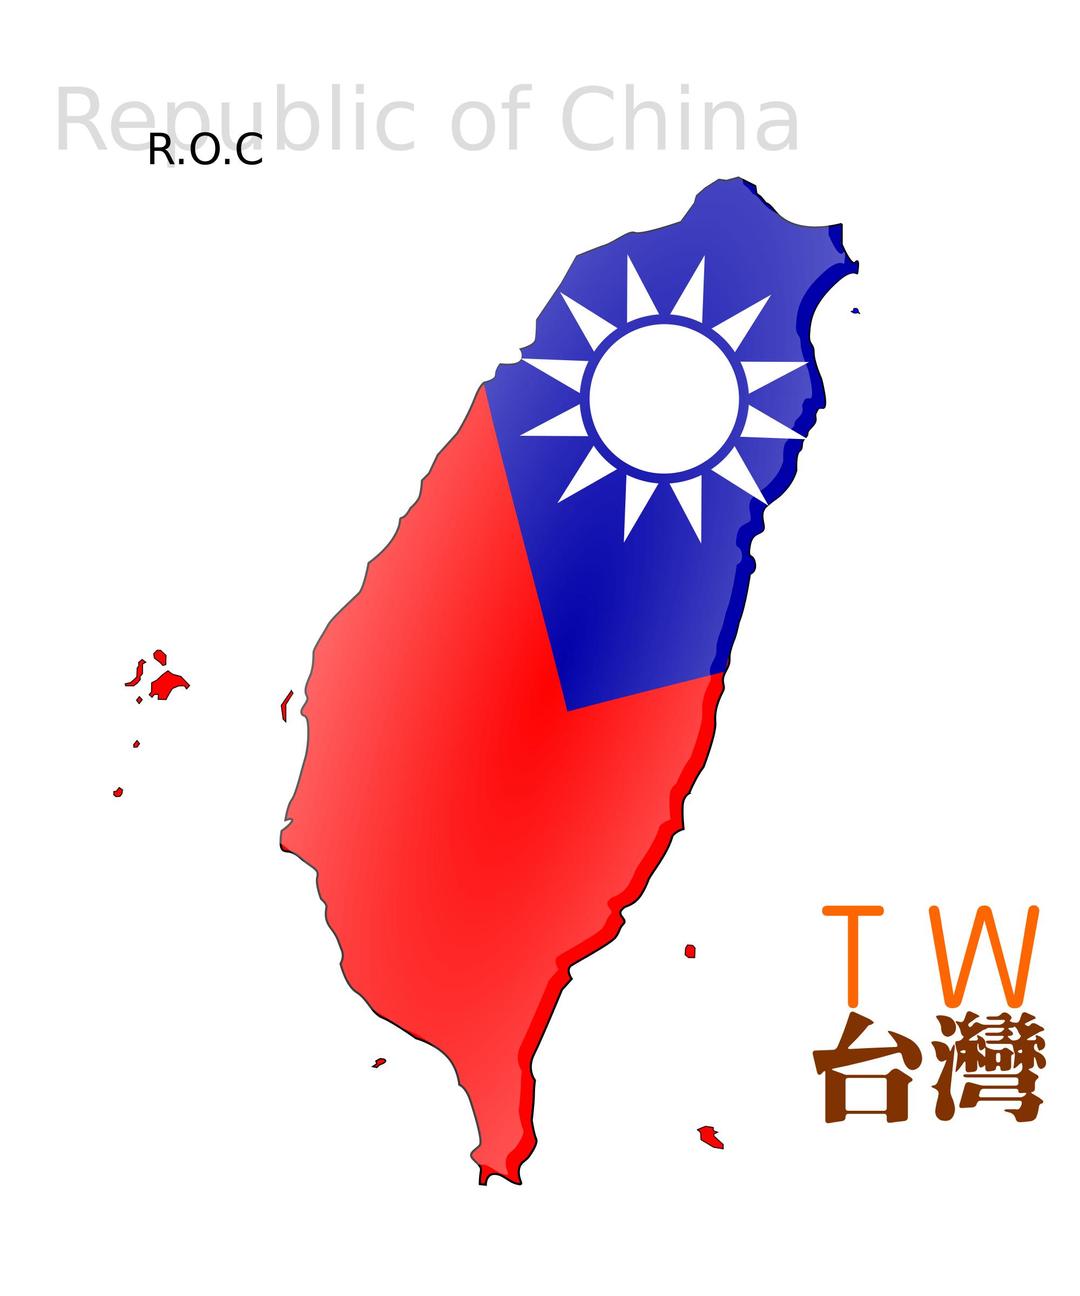 Map-based flag of Taiwan png transparent